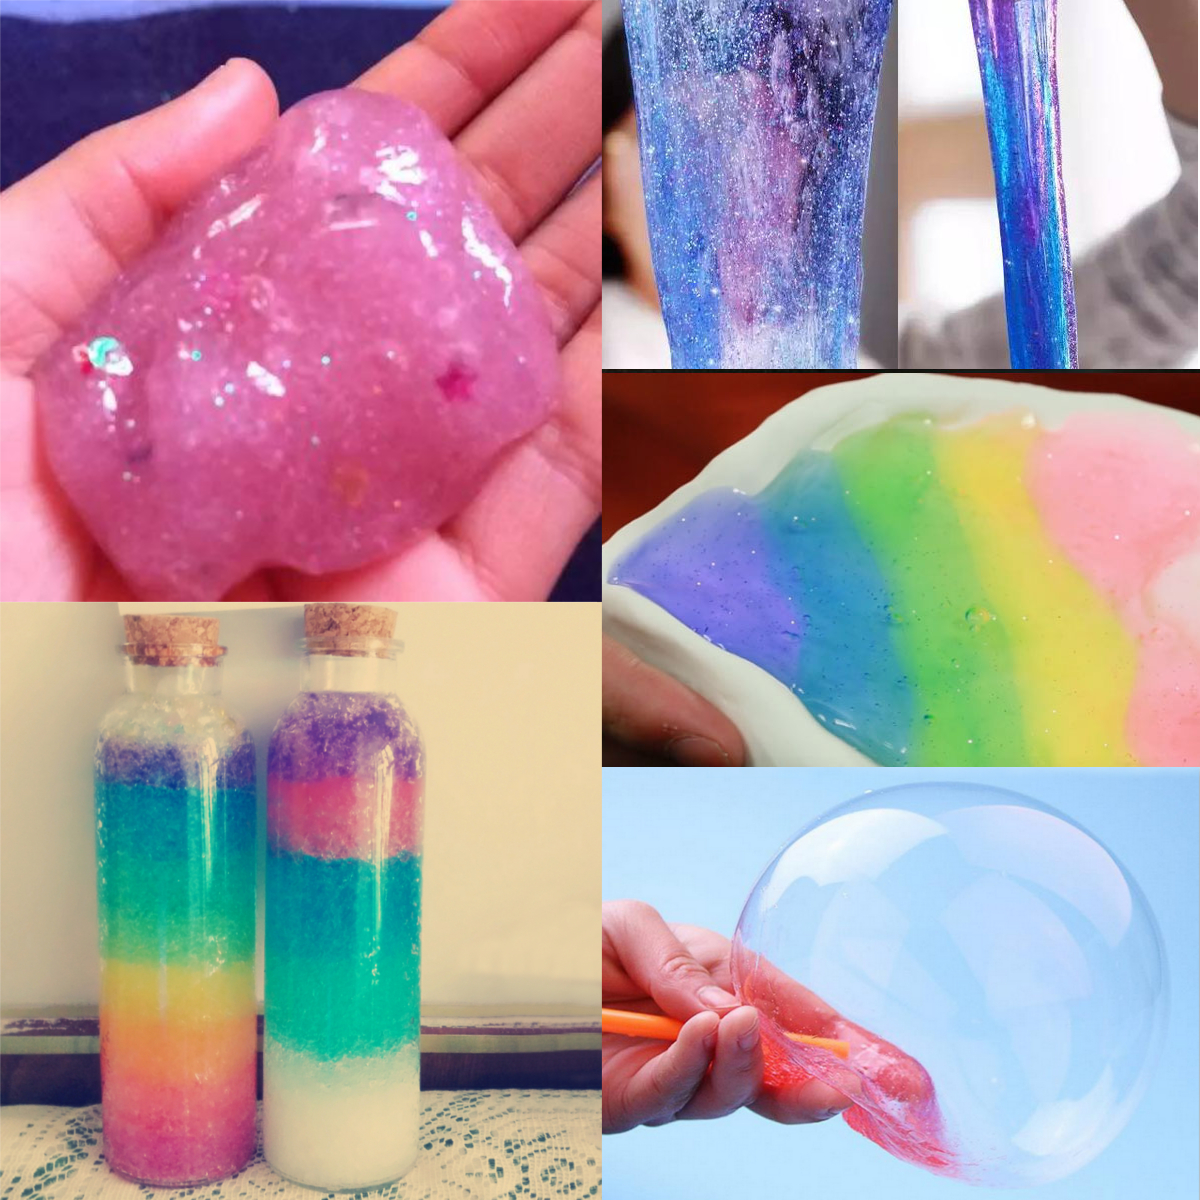 DIY-Slime-Kit-Fluffy-Crystal-Borax-Gliter-Powder-Glue-Play-Game-Kids-Toy-Adults-Stress-Reliever-Gift-1205725-6